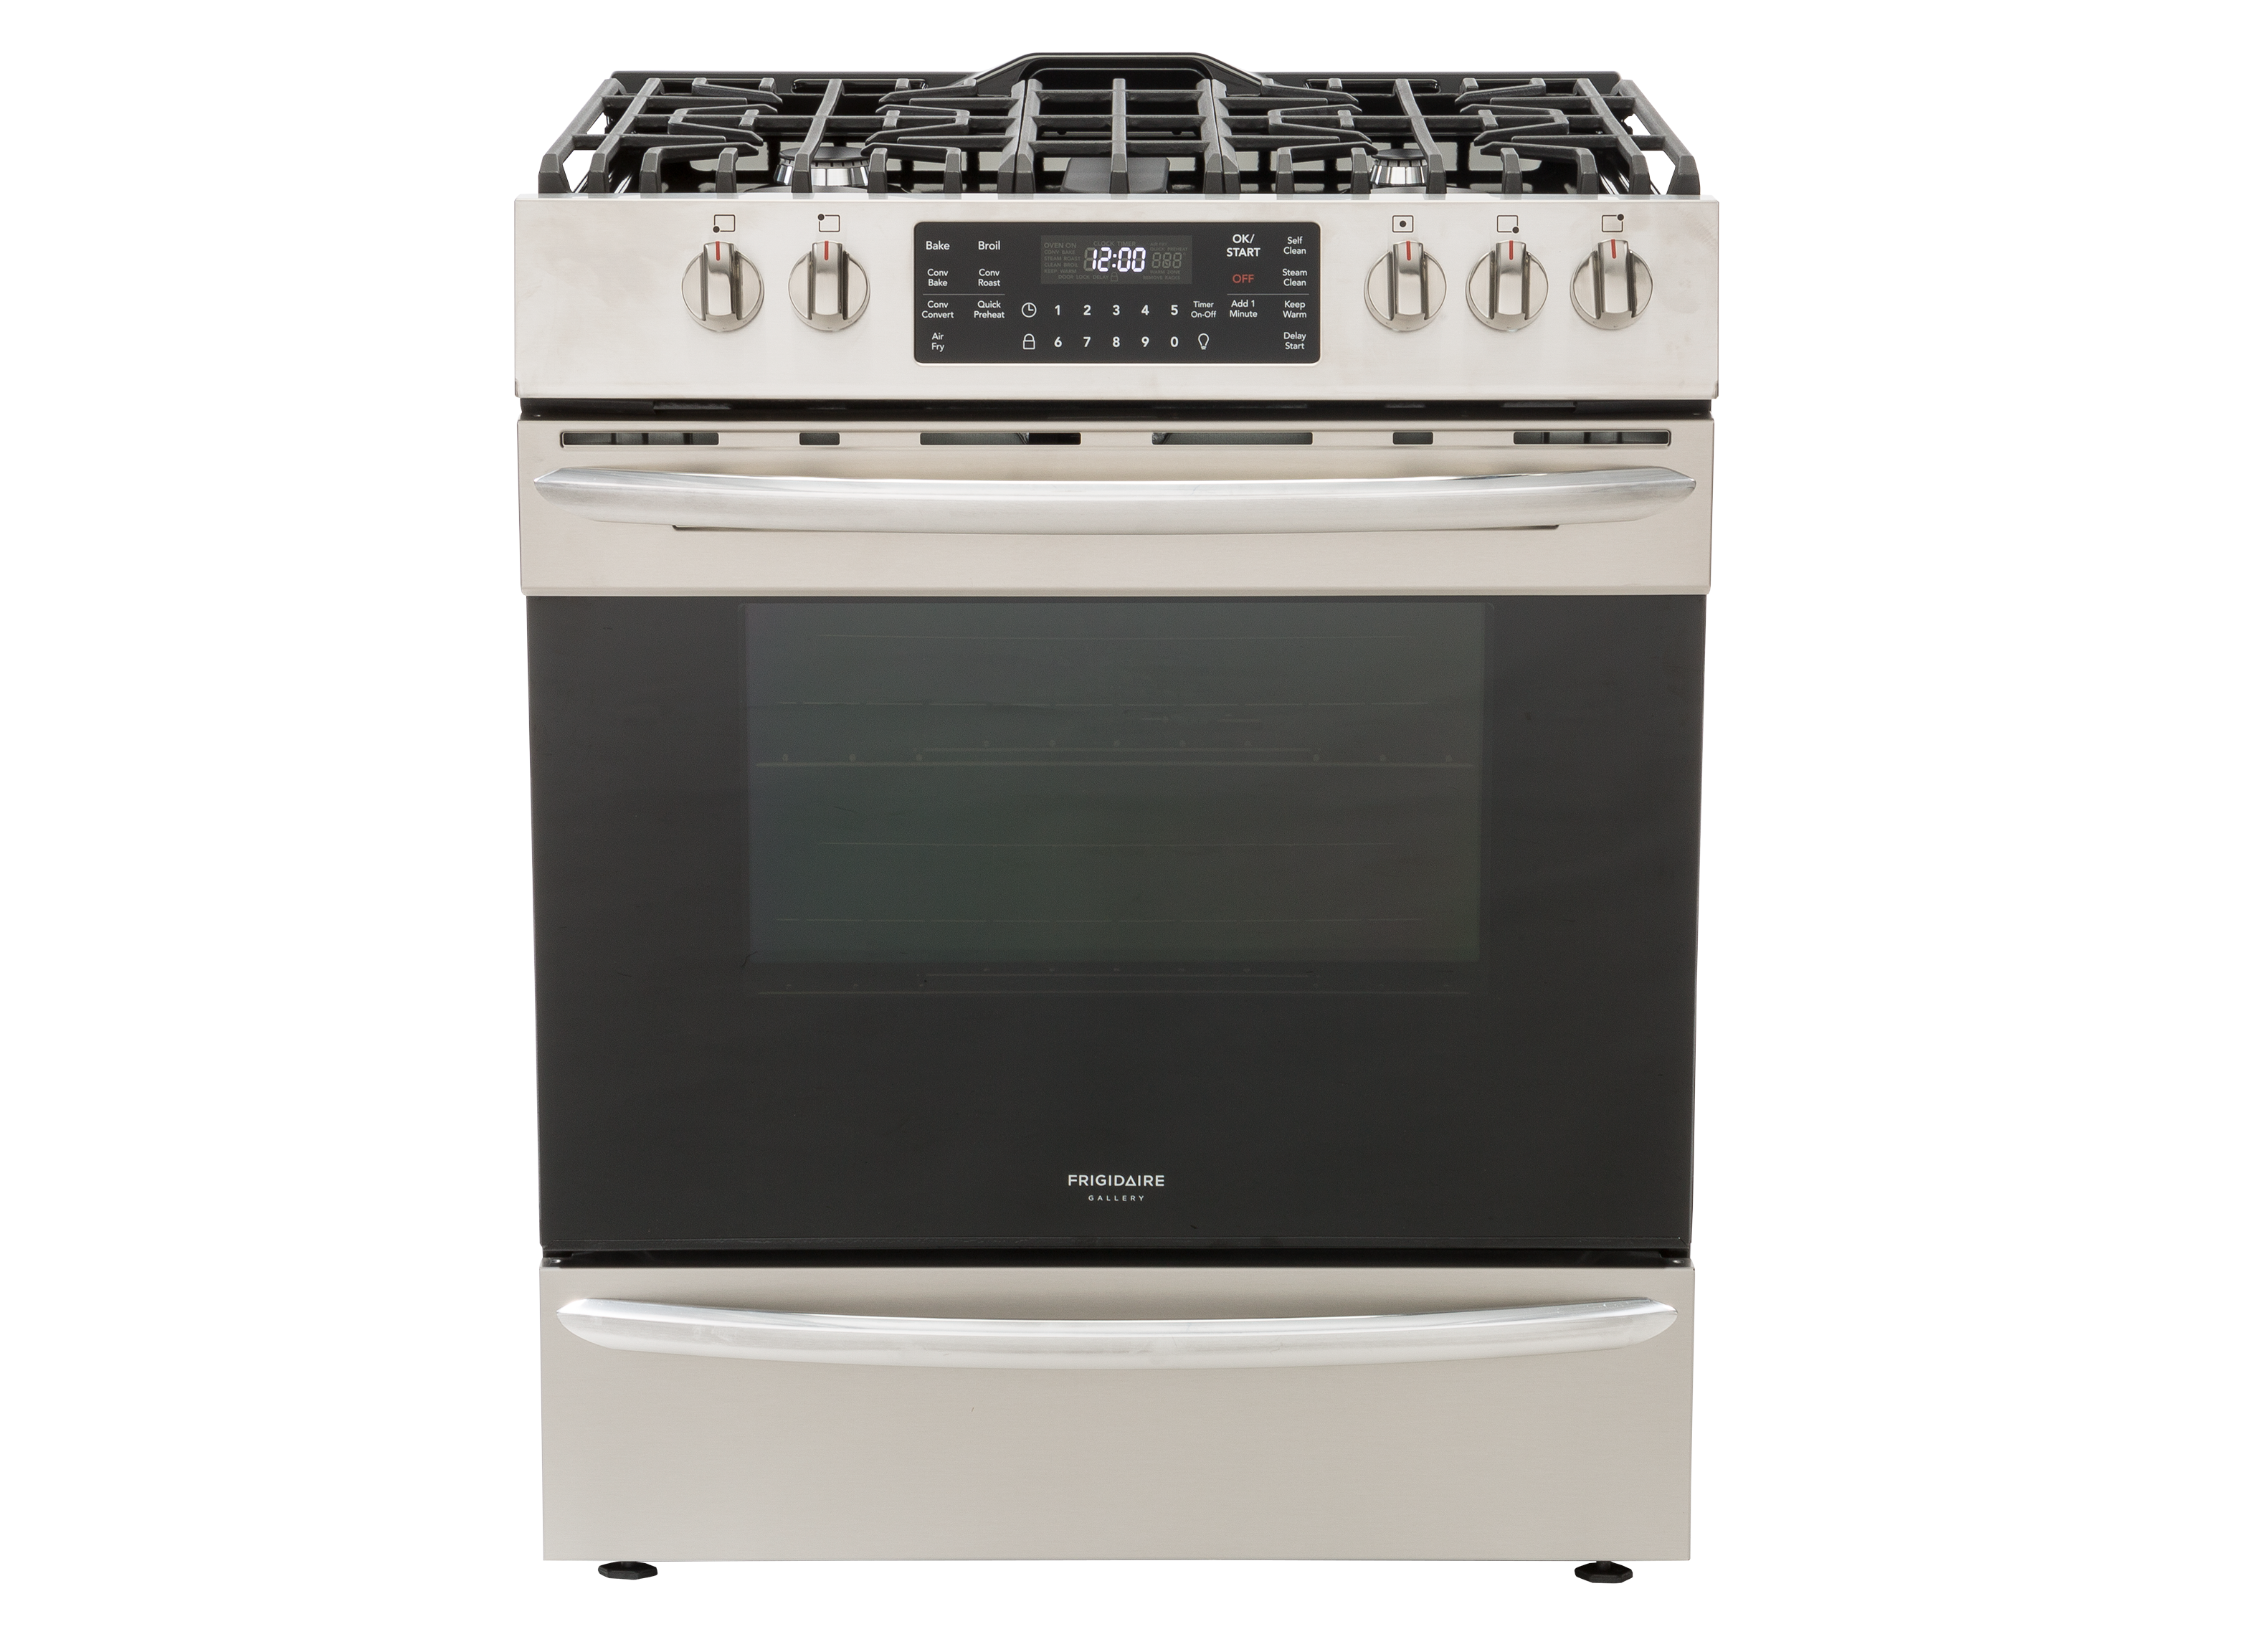 https://crdms.images.consumerreports.org/prod/products/cr/models/399554-gas-and-dual-fuel-single-oven-30-inch-frigidaire-fggh3047vf-10007943.png